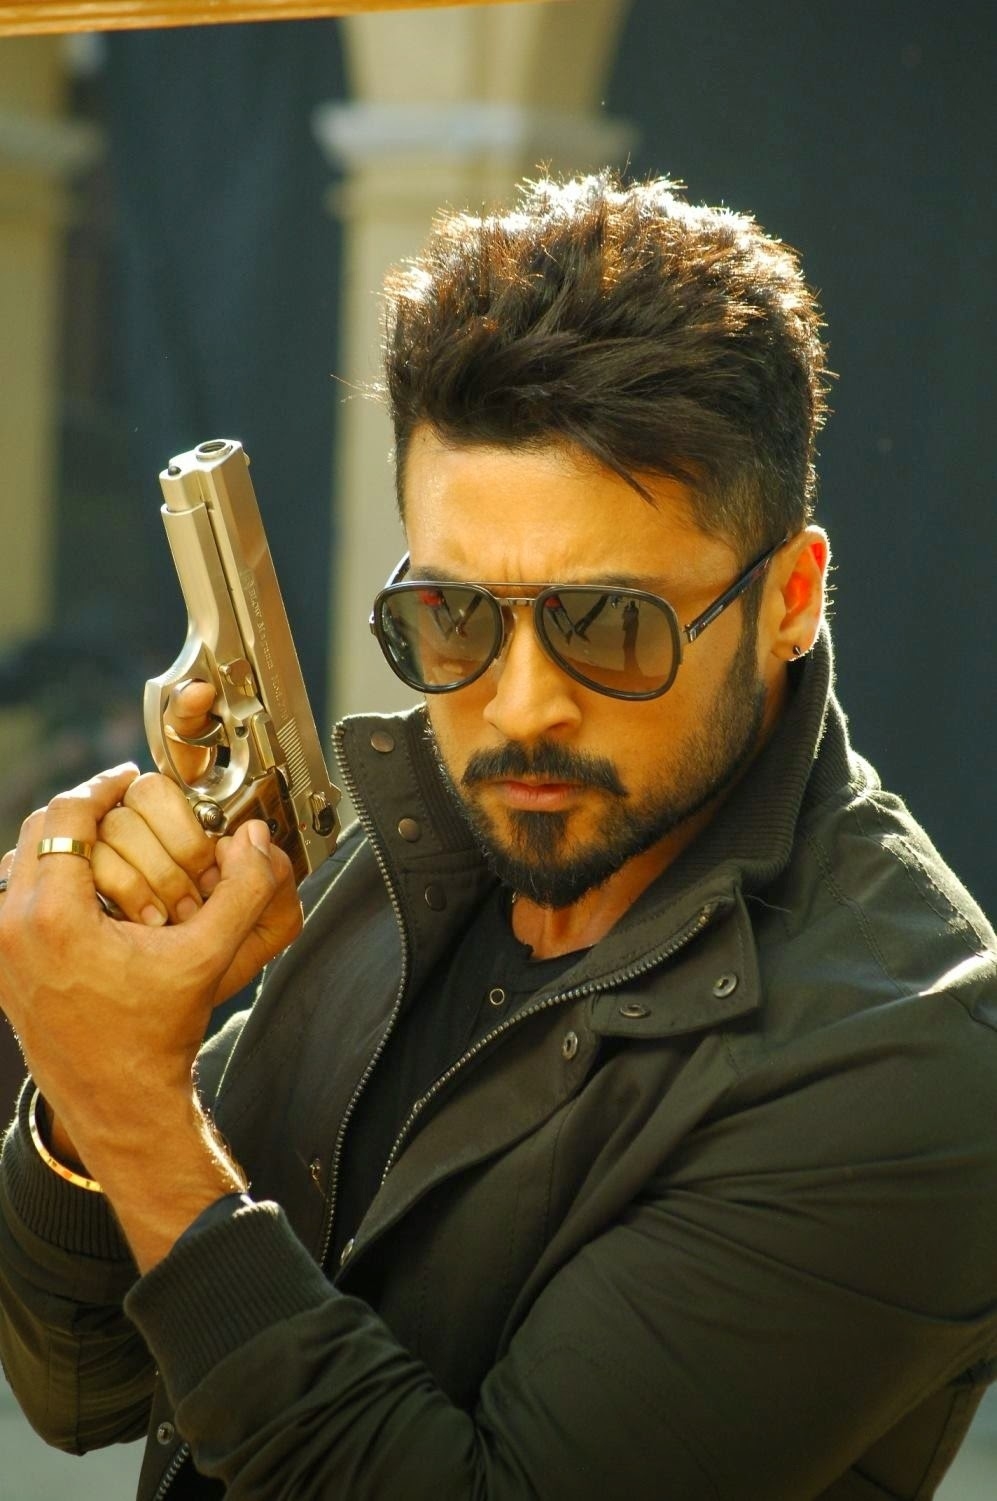 Anjaan Surya Hairstyle Hd Images inside Steps For Anjaan Hairstyle